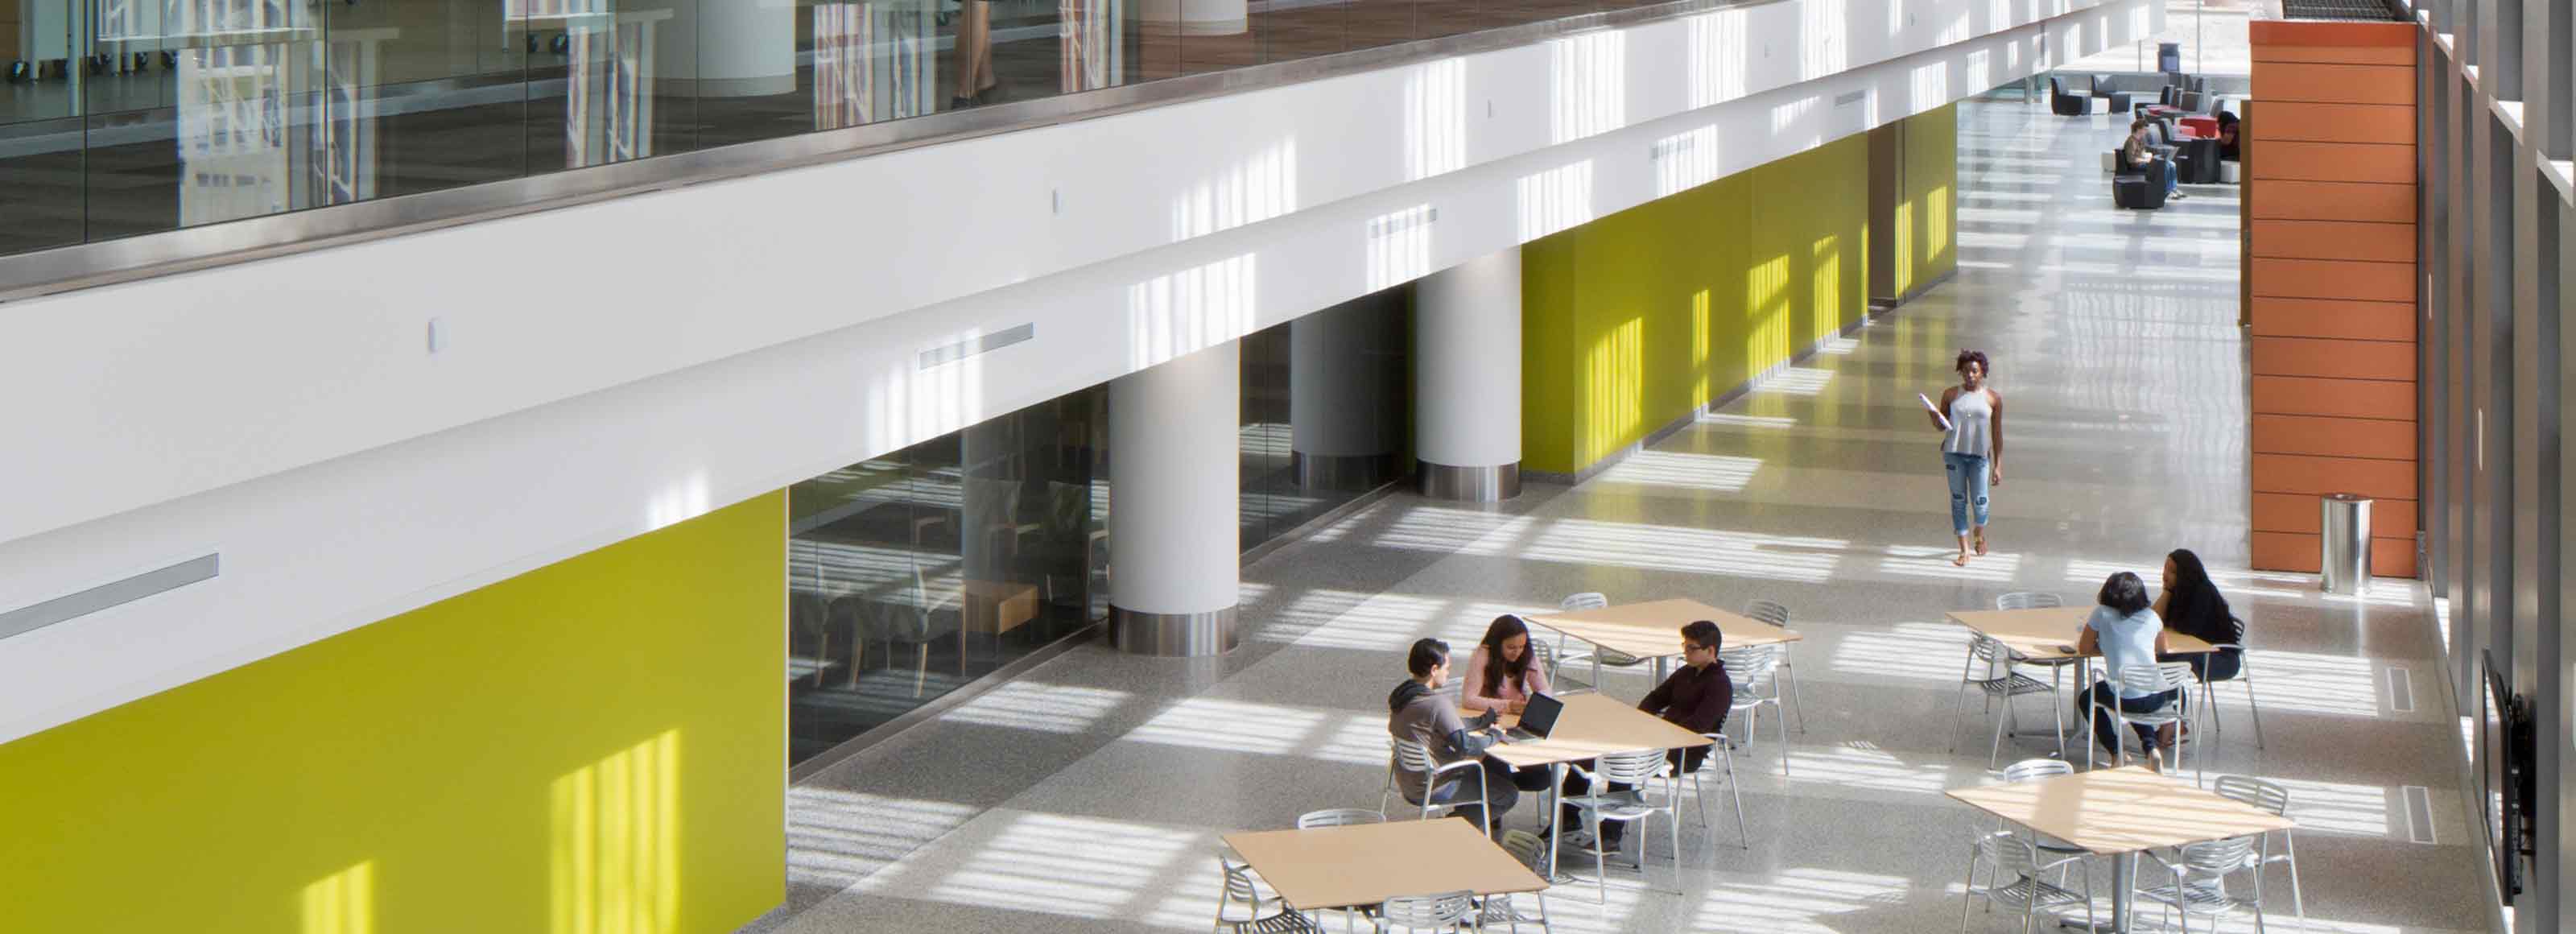 Interior of the iBio building with students working